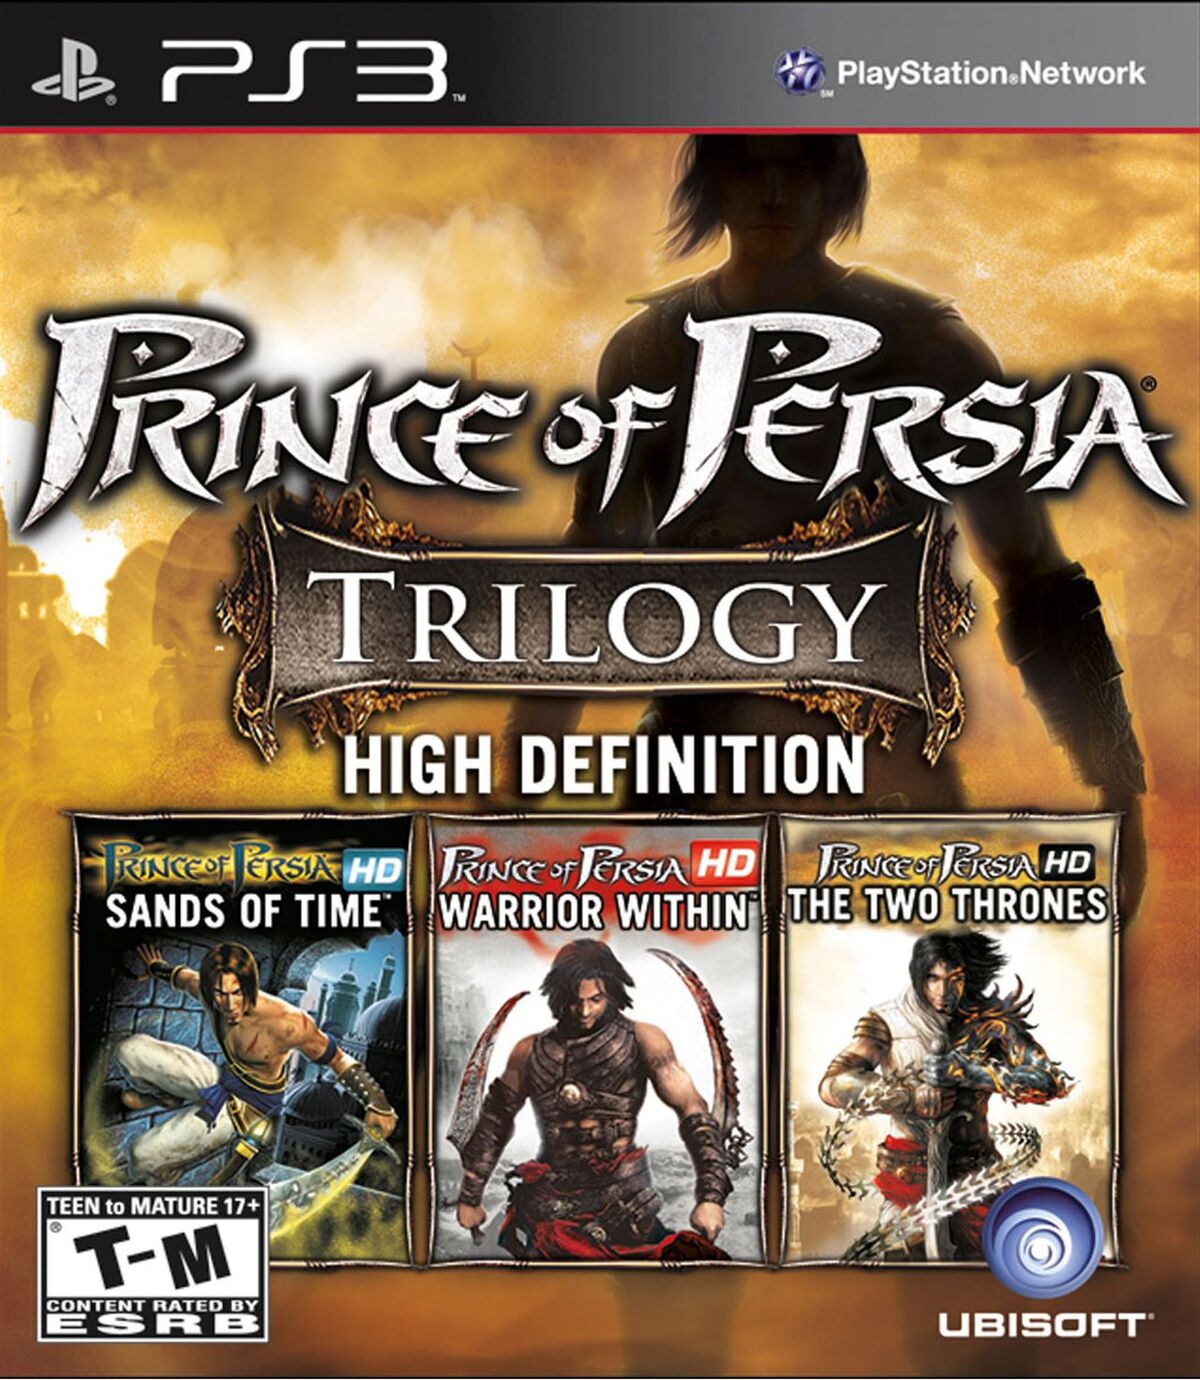 Prince of Persia Trilogy (HD Collection), Prince of Persia Wiki